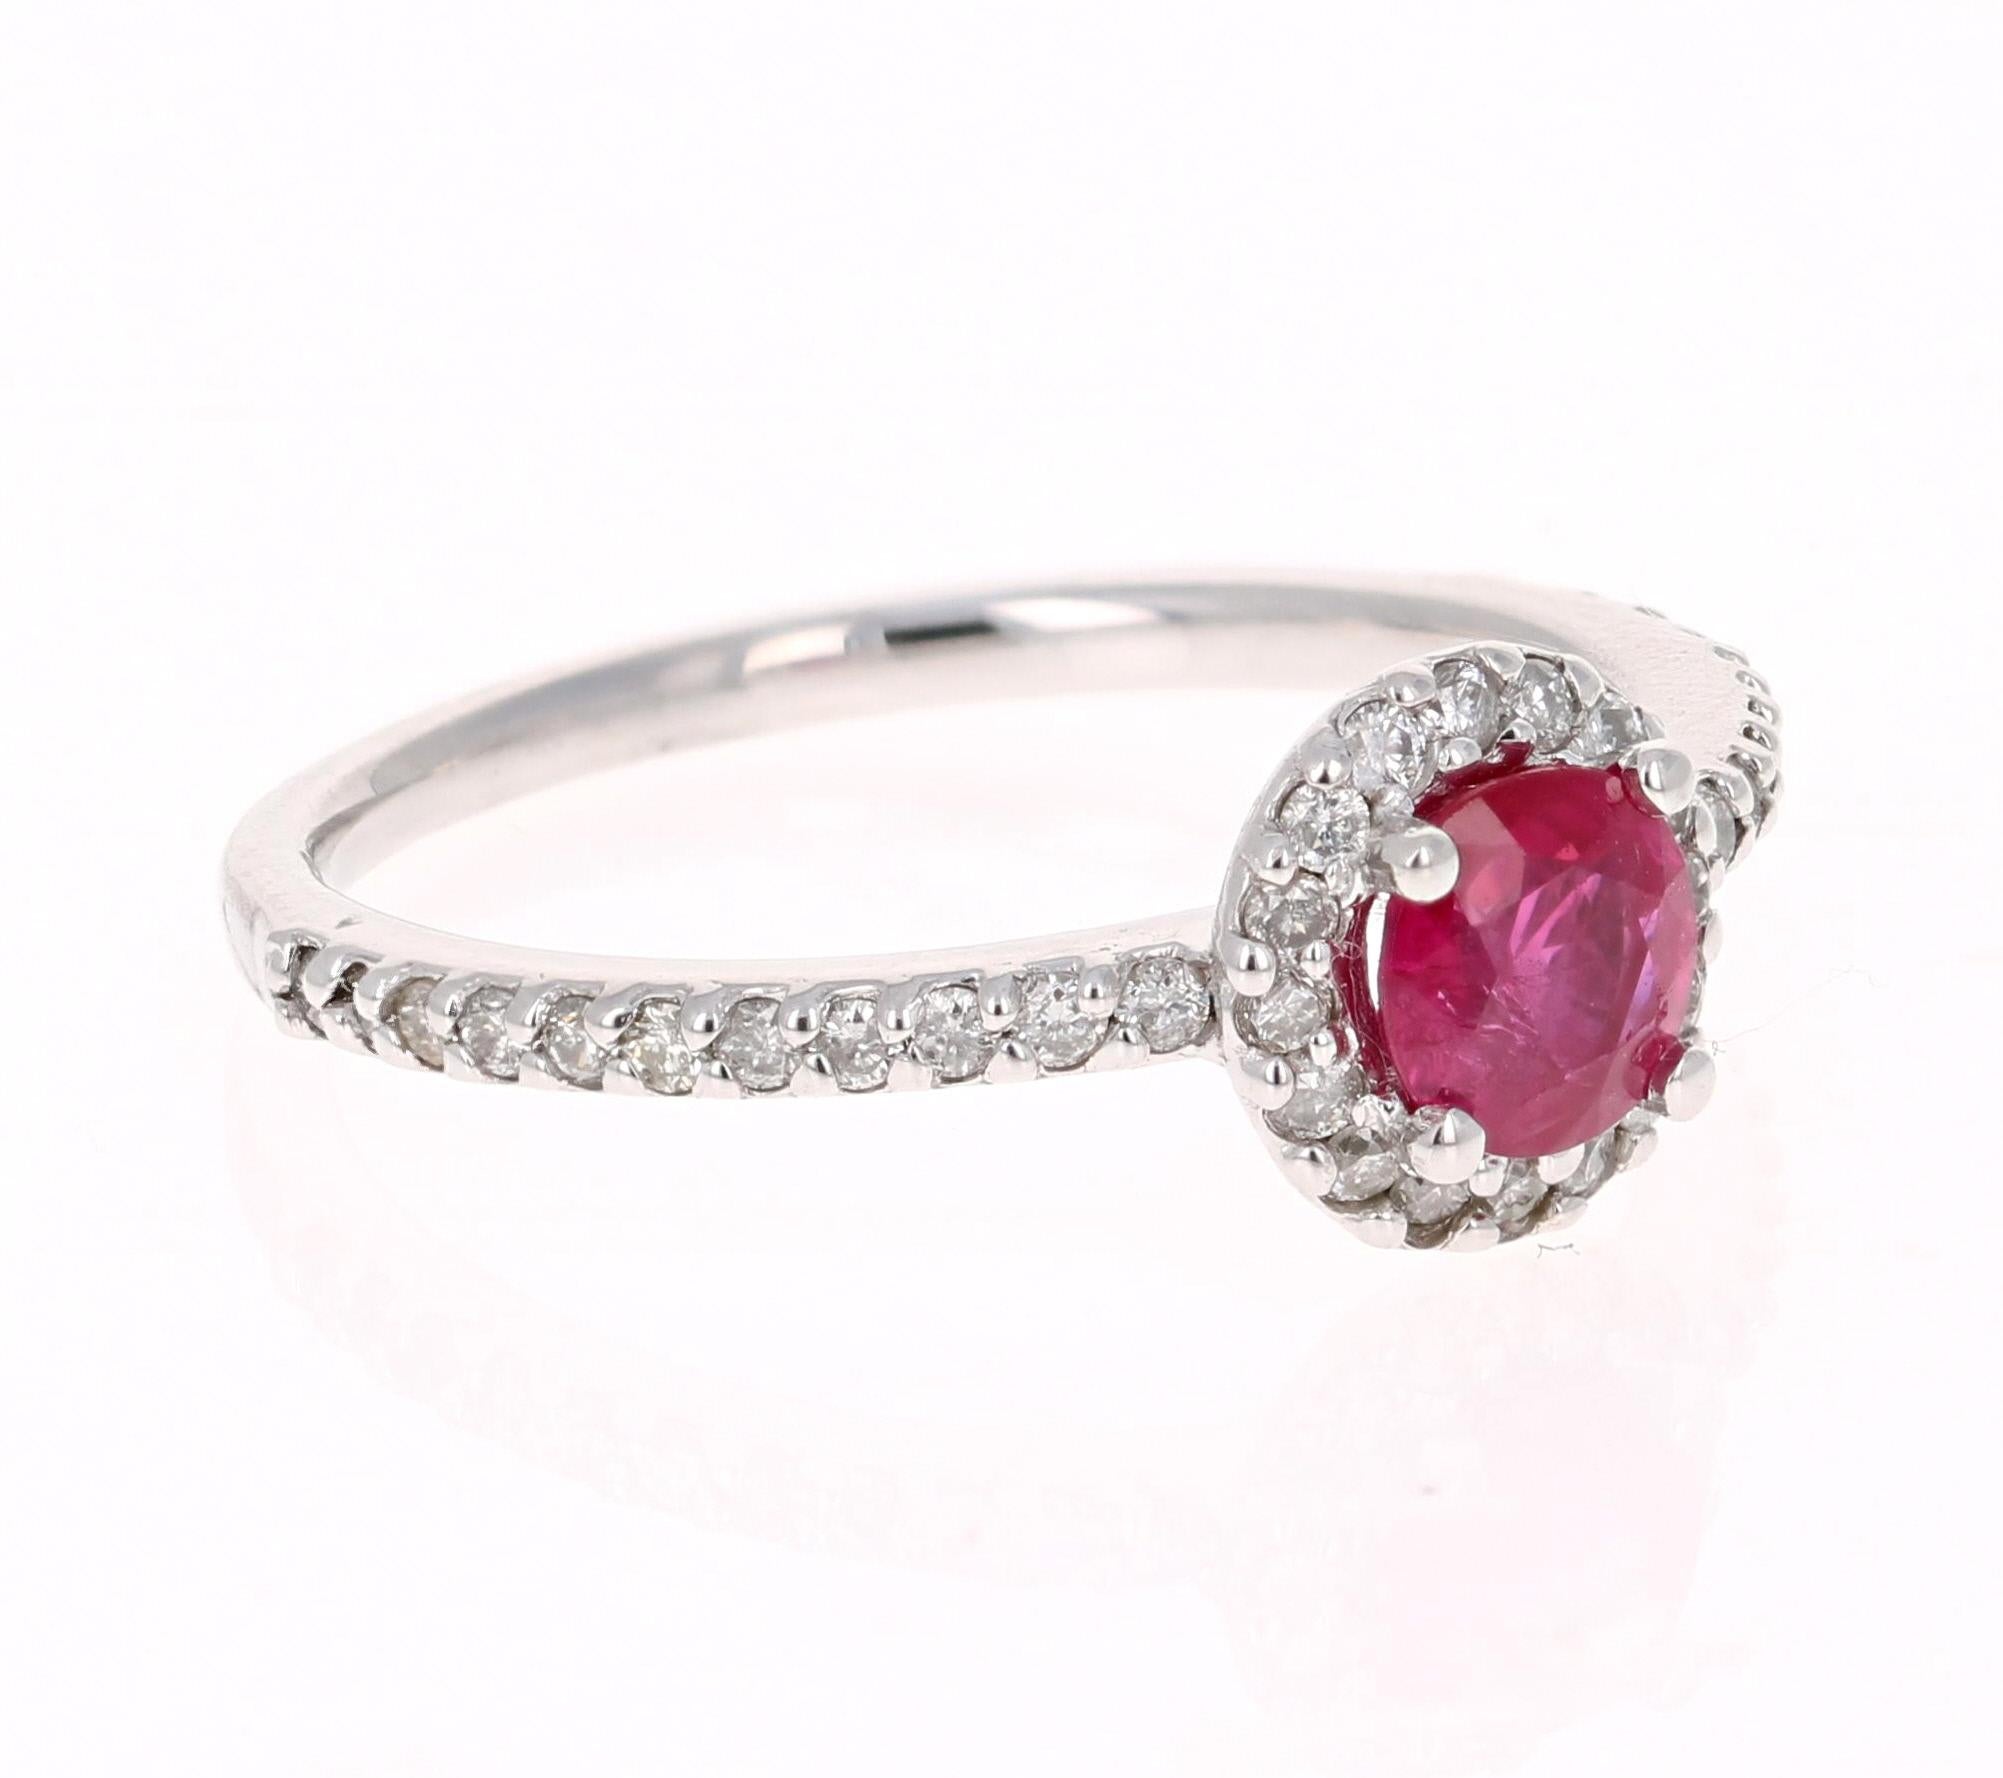 Simply beautiful Ruby Diamond Ring with a Round Cut 0.66 Carat Burmese Ruby which is surrounded by 38 Round Cut Diamonds that weigh 0.37 carats. The total carat weight of the ring is 1.03 carats. The Round Cut Ruby measures at 5.5 mm and the face of